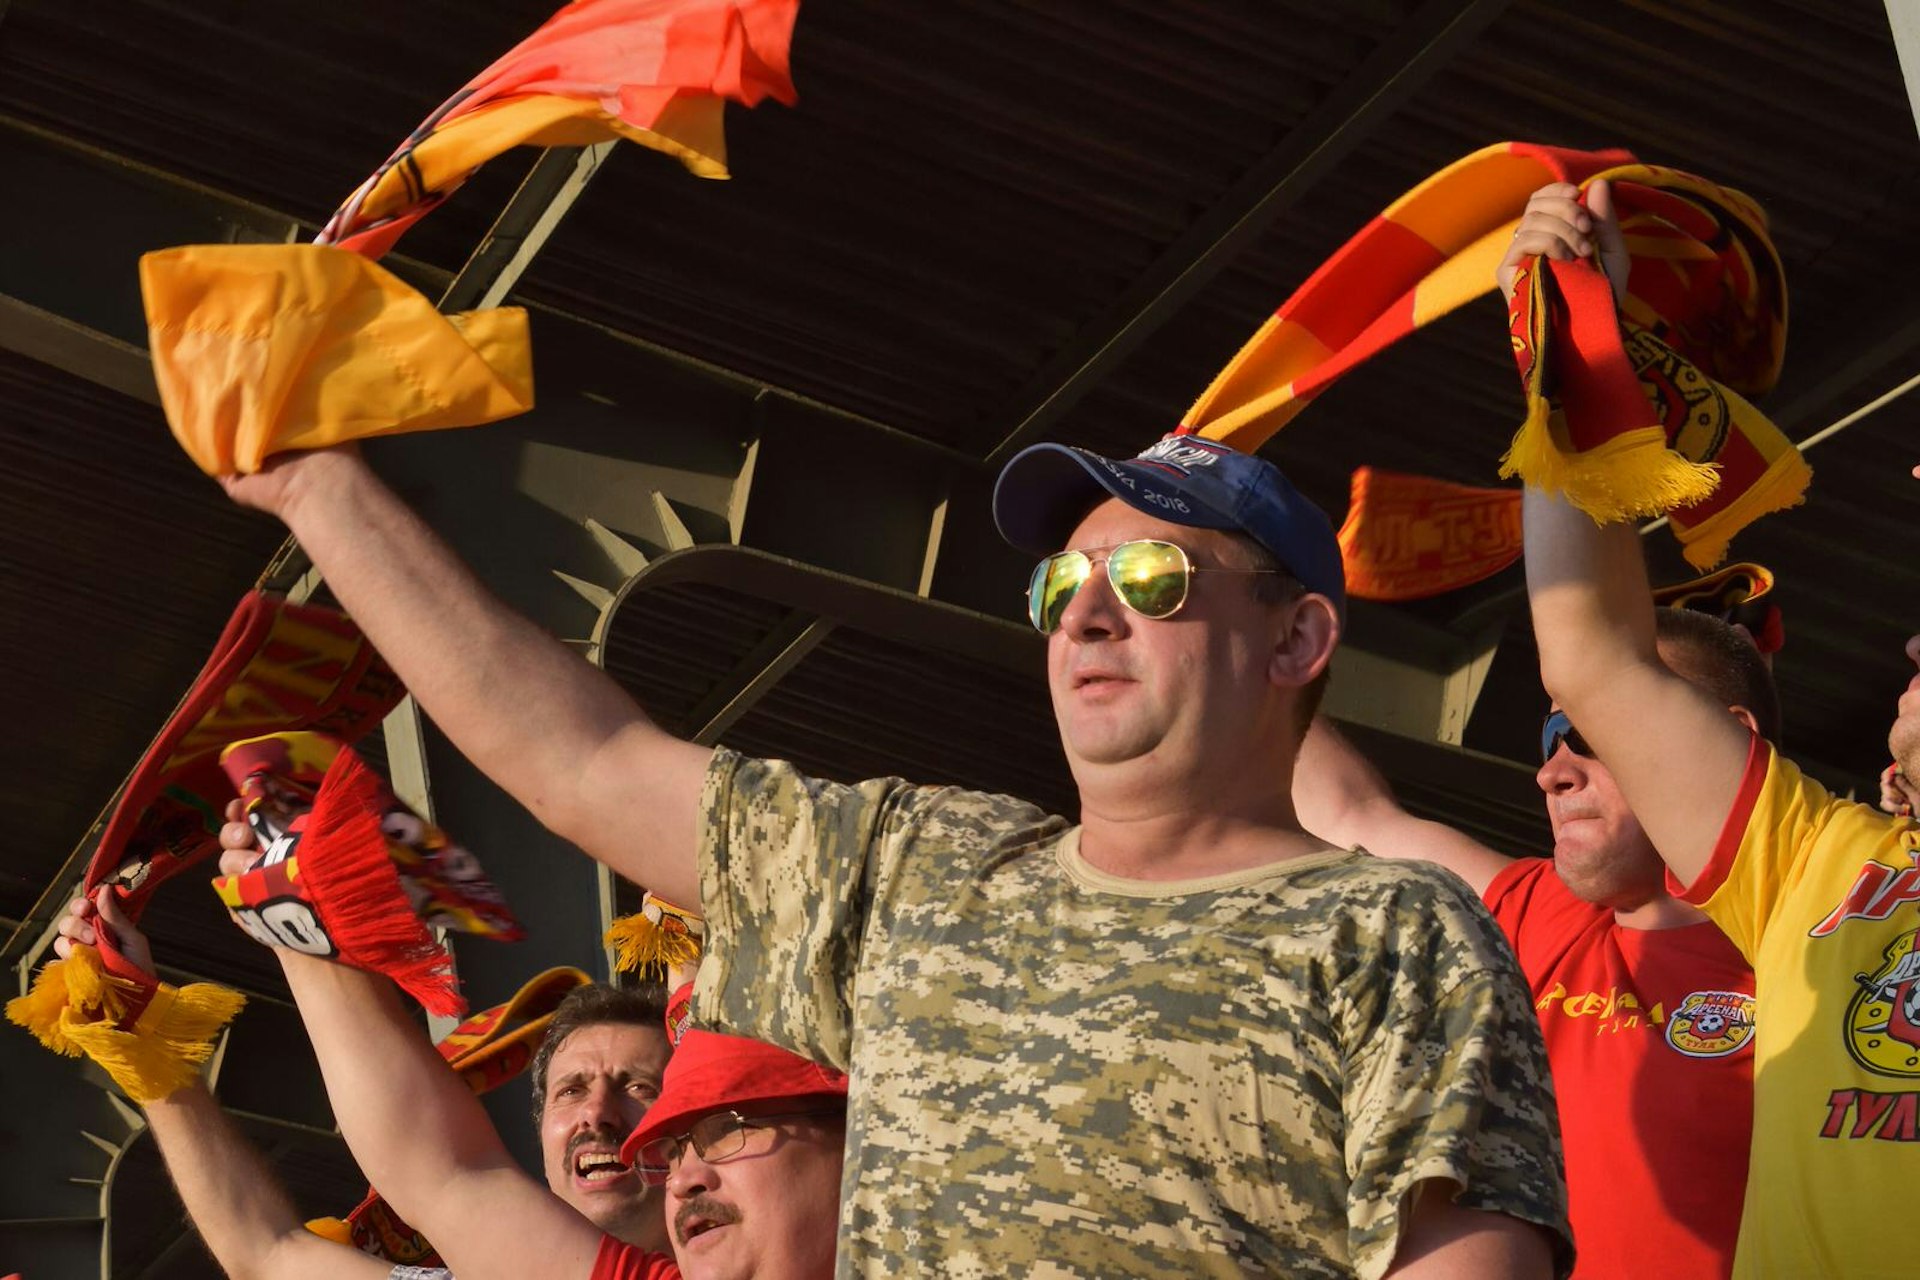 A Tulsa fan waves a red and yellow scarf in the air at a football match. The man is wearing a green, camouflage-print t-shirt, baseball cap and aviator sunglasses. 